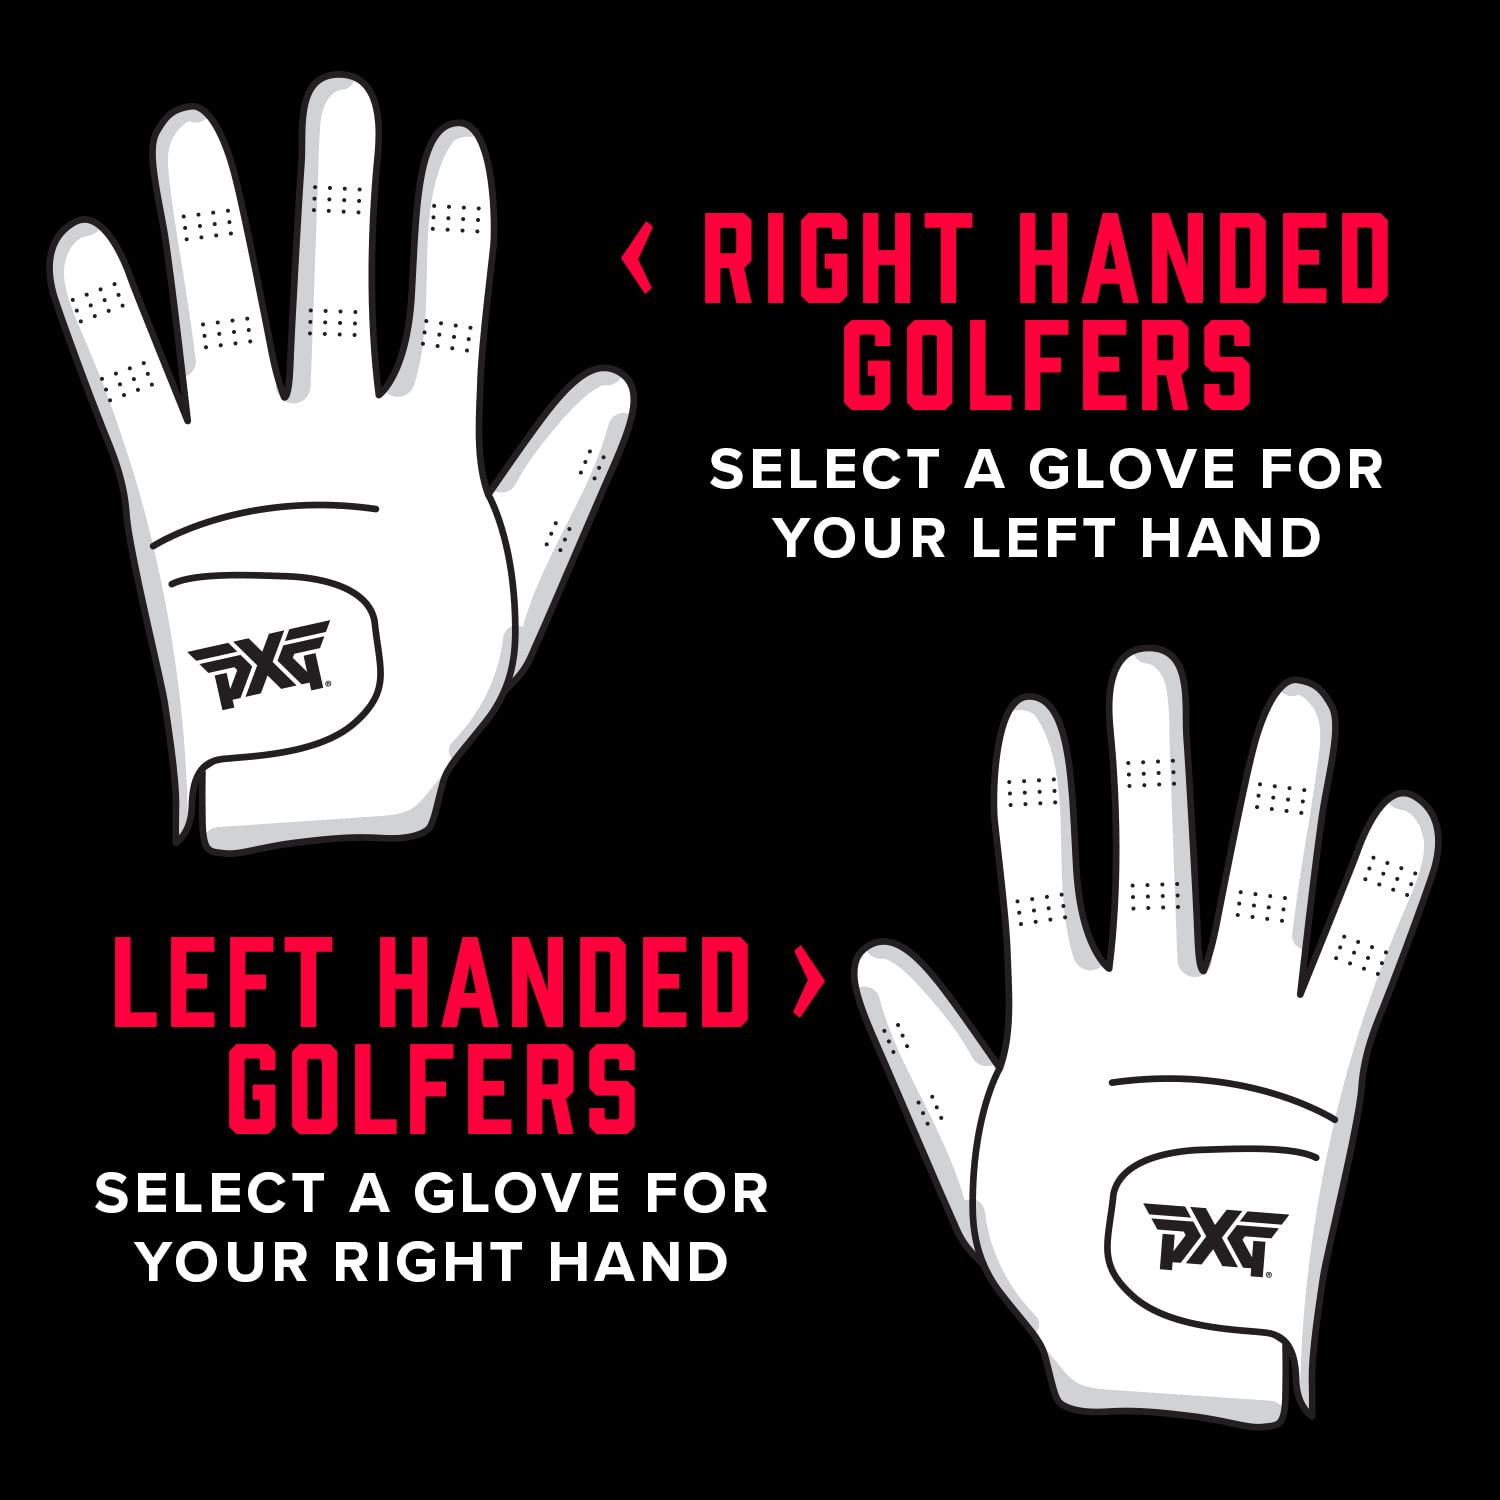 PXG Men's Players Tour Golf Glove - 100% Cabretta Leather with Cotton-Based Elastic Wristband